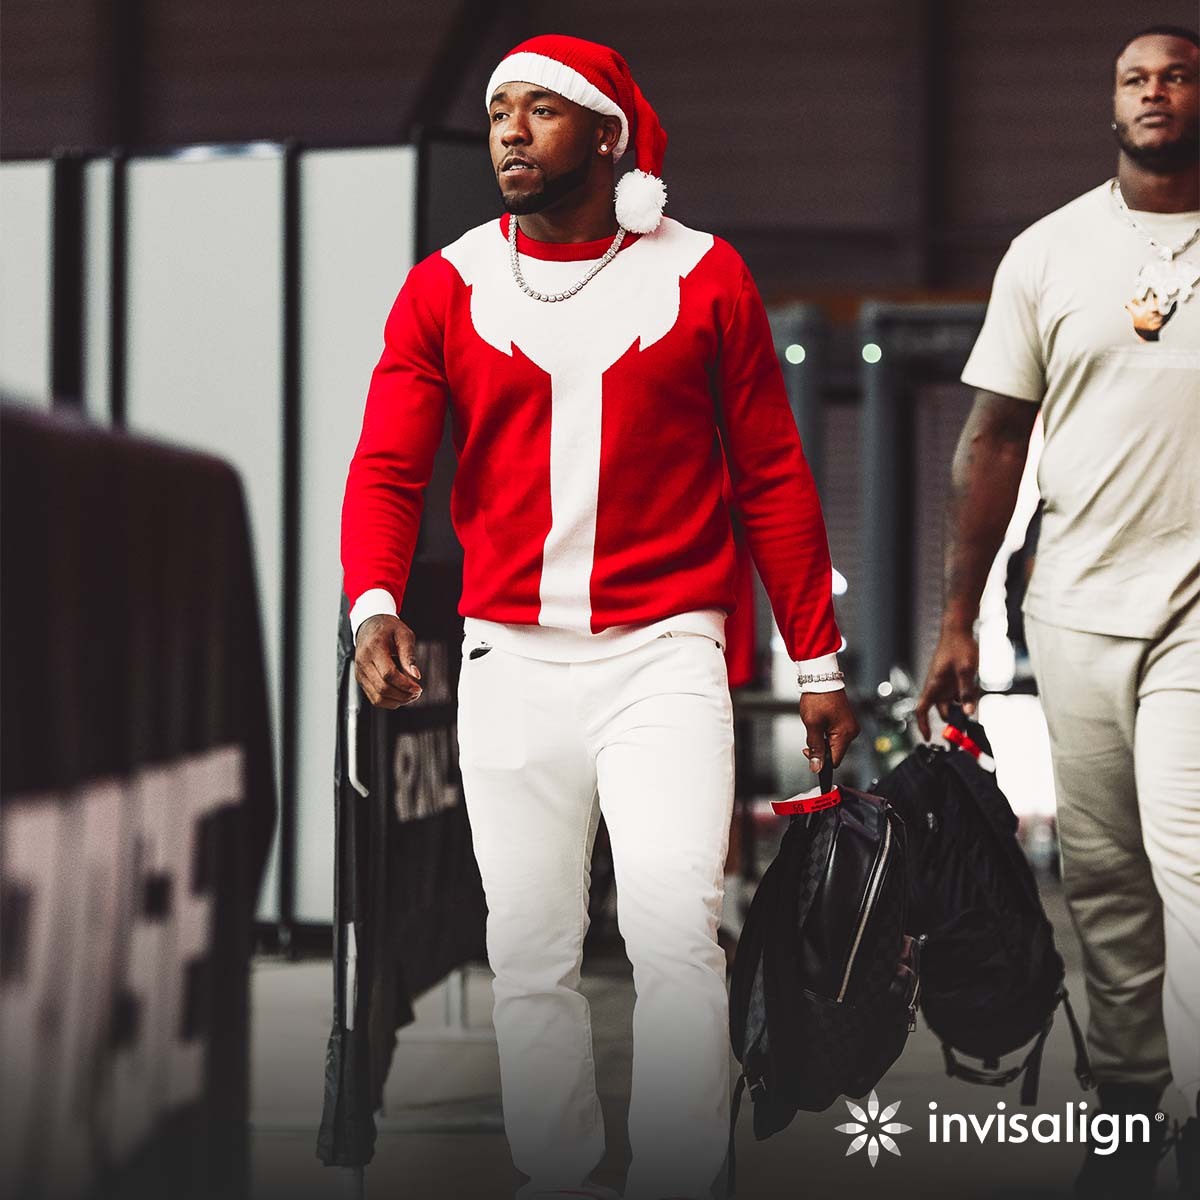 Arizona Cardinals arrive in holiday spirit for Christmas Day game vs. Colts